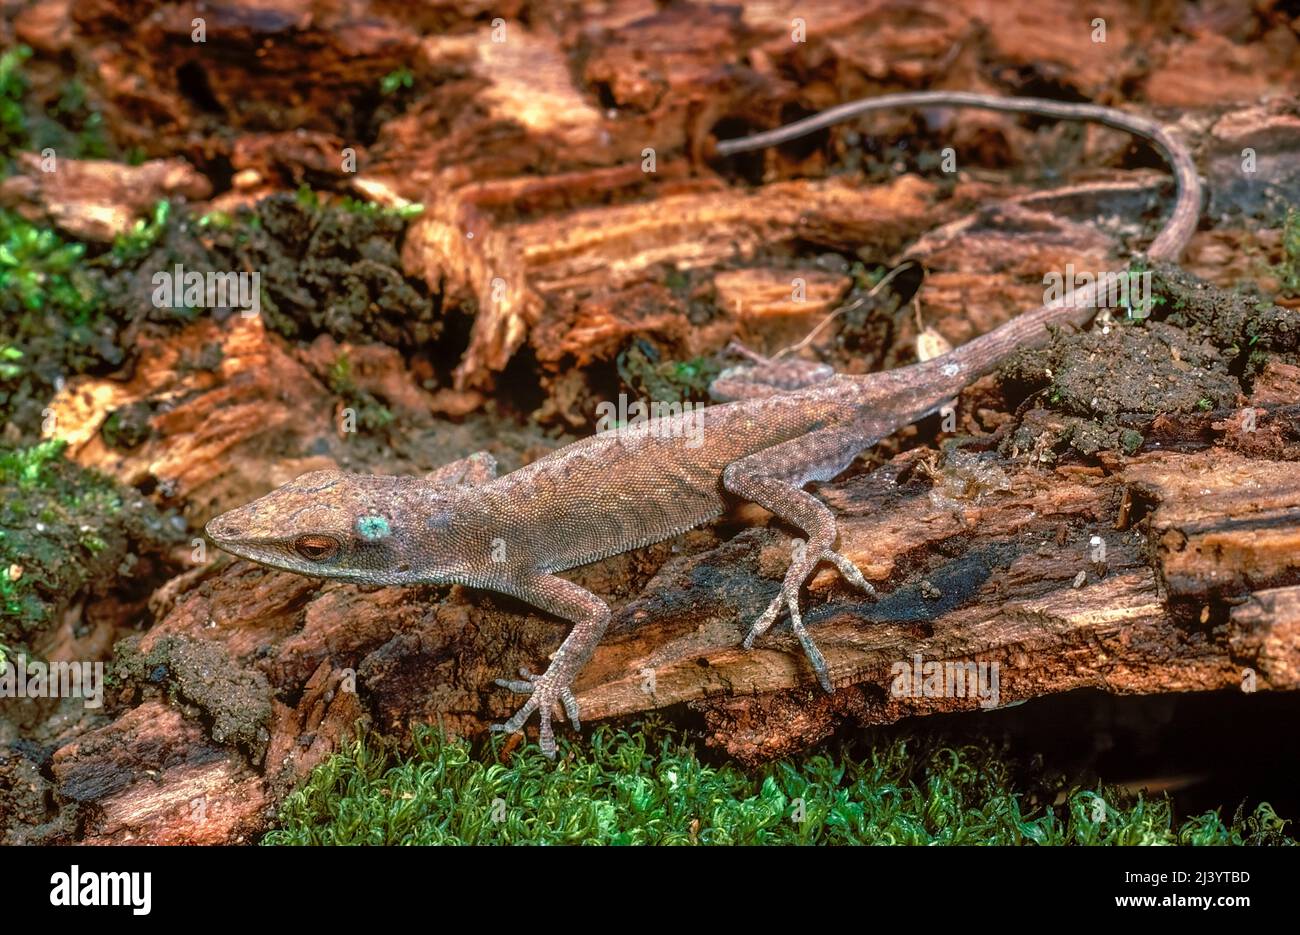 Carolina Anole (Anolis carolinensis), changing colors, brown from green to blend into environment. Stock Photo